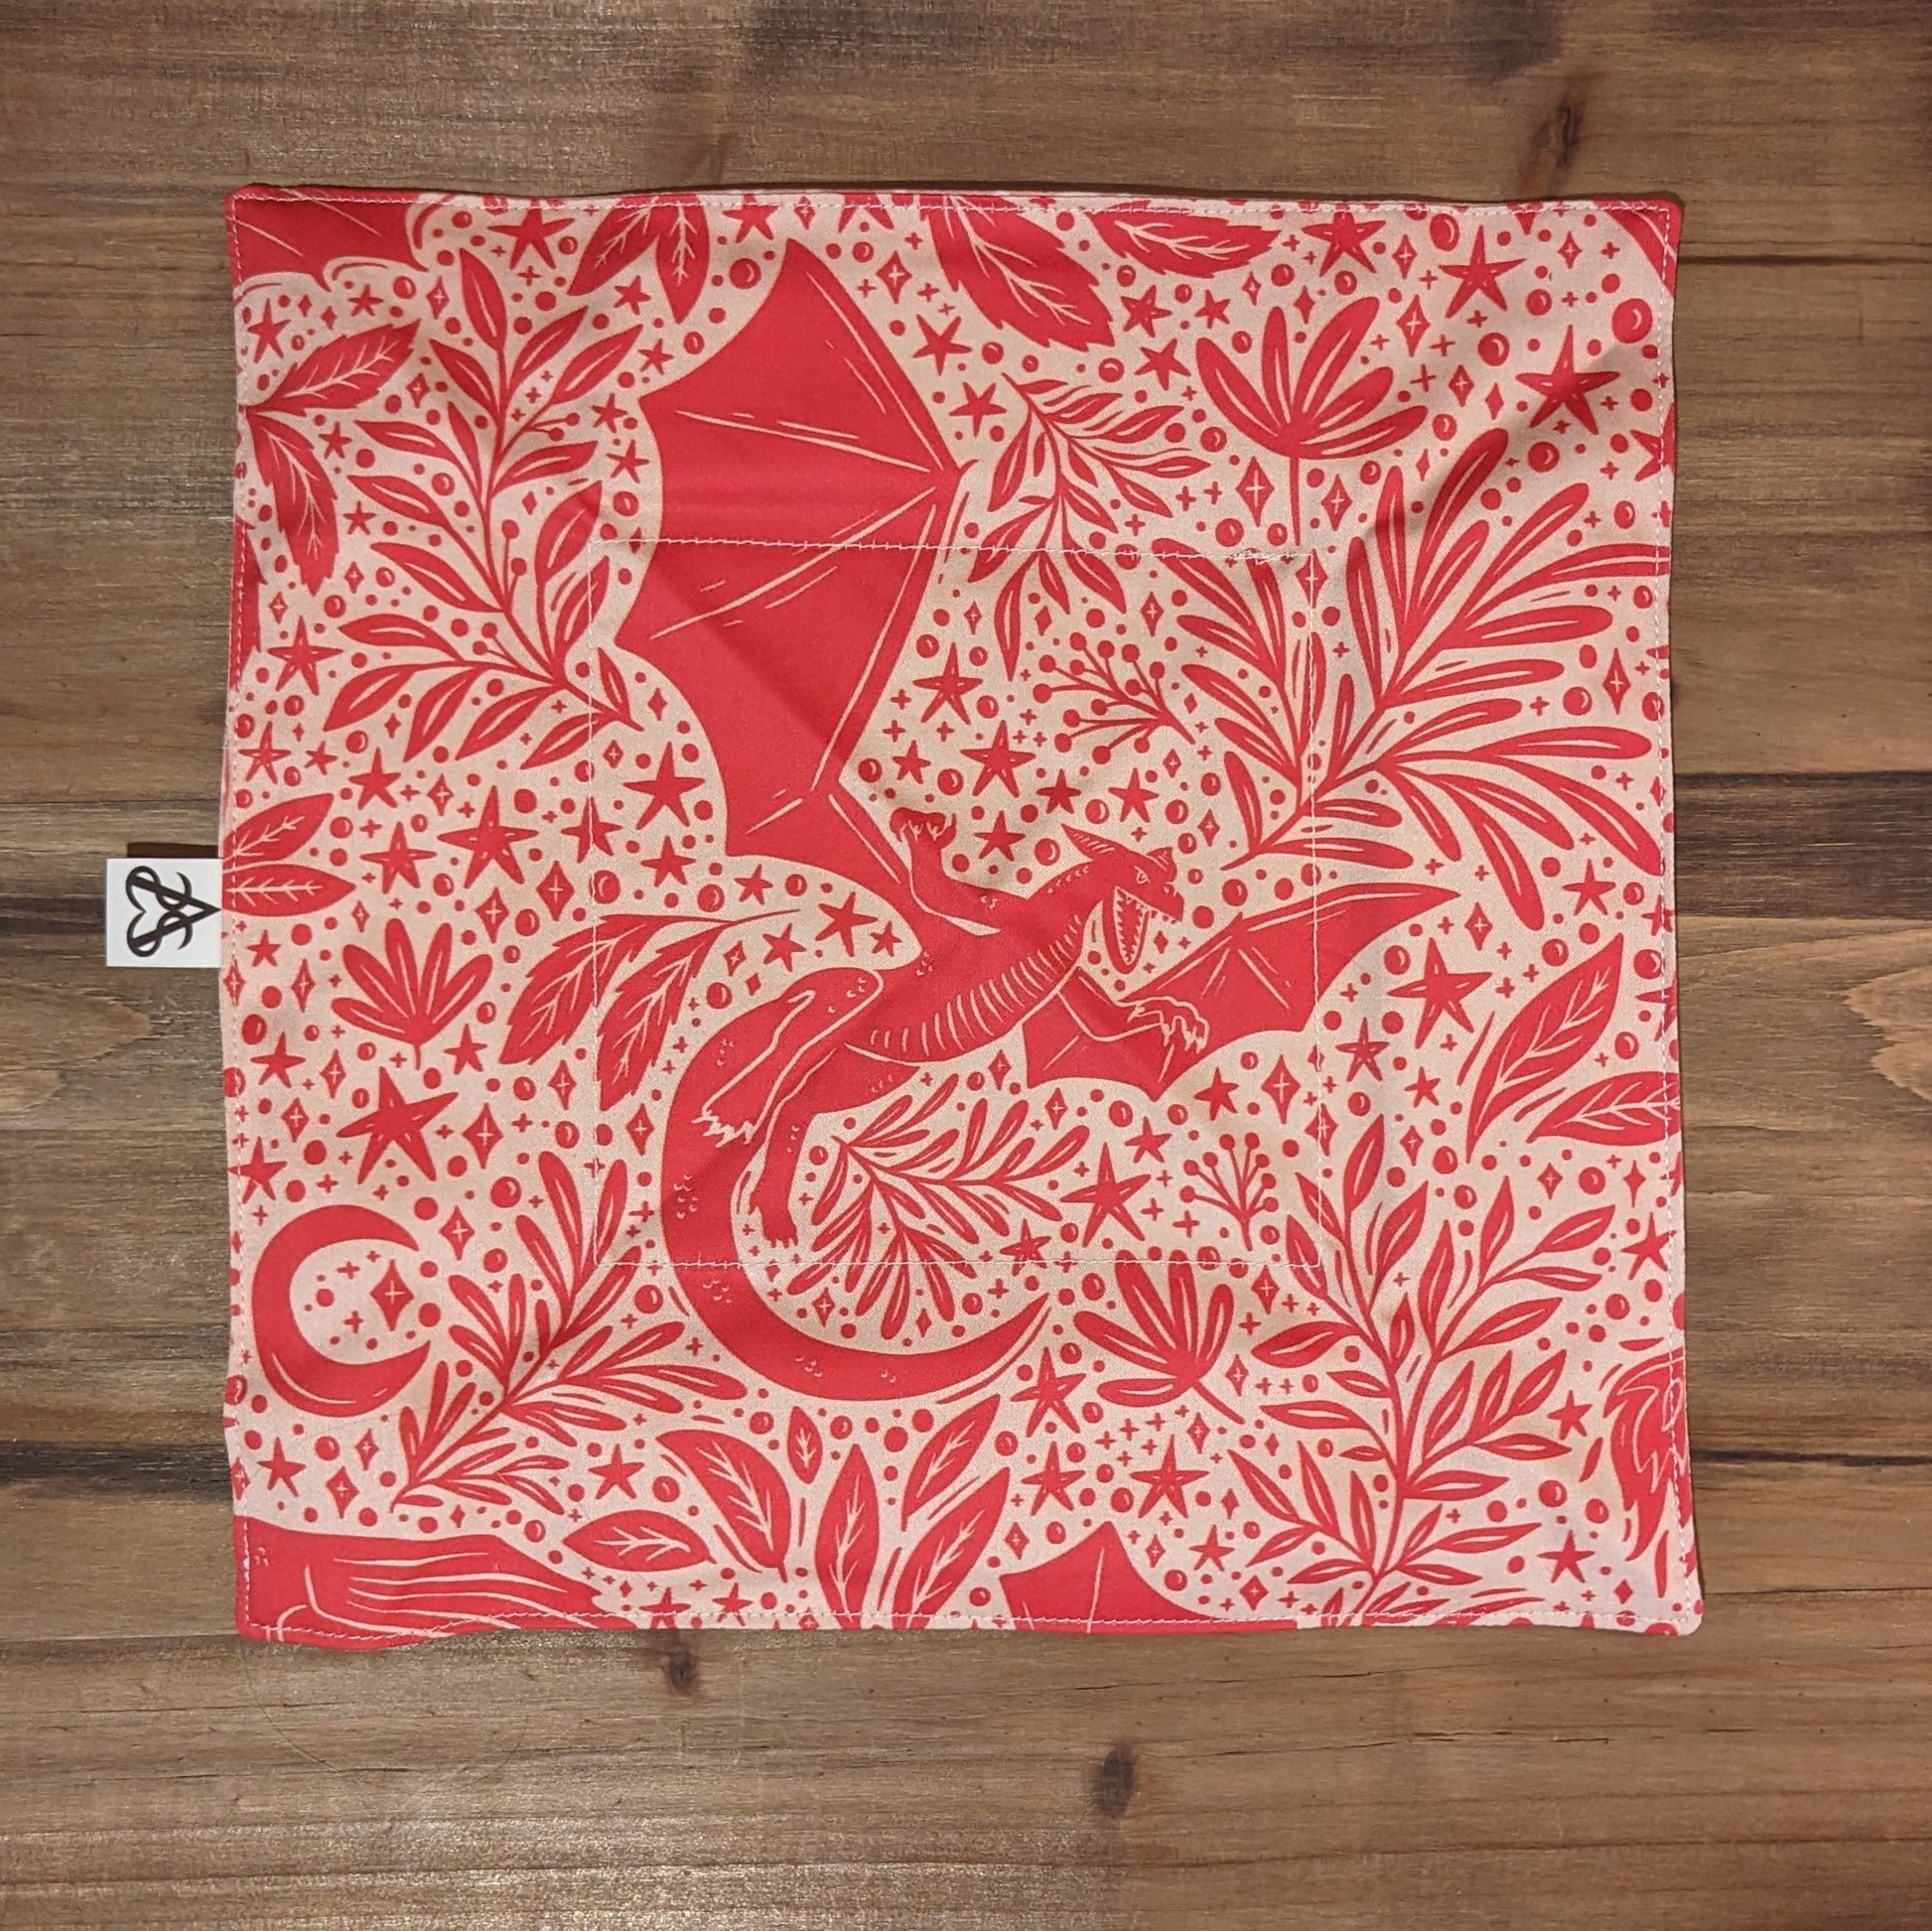 A view of the flat tray to show the vibrant dragon, botanical, and star design.